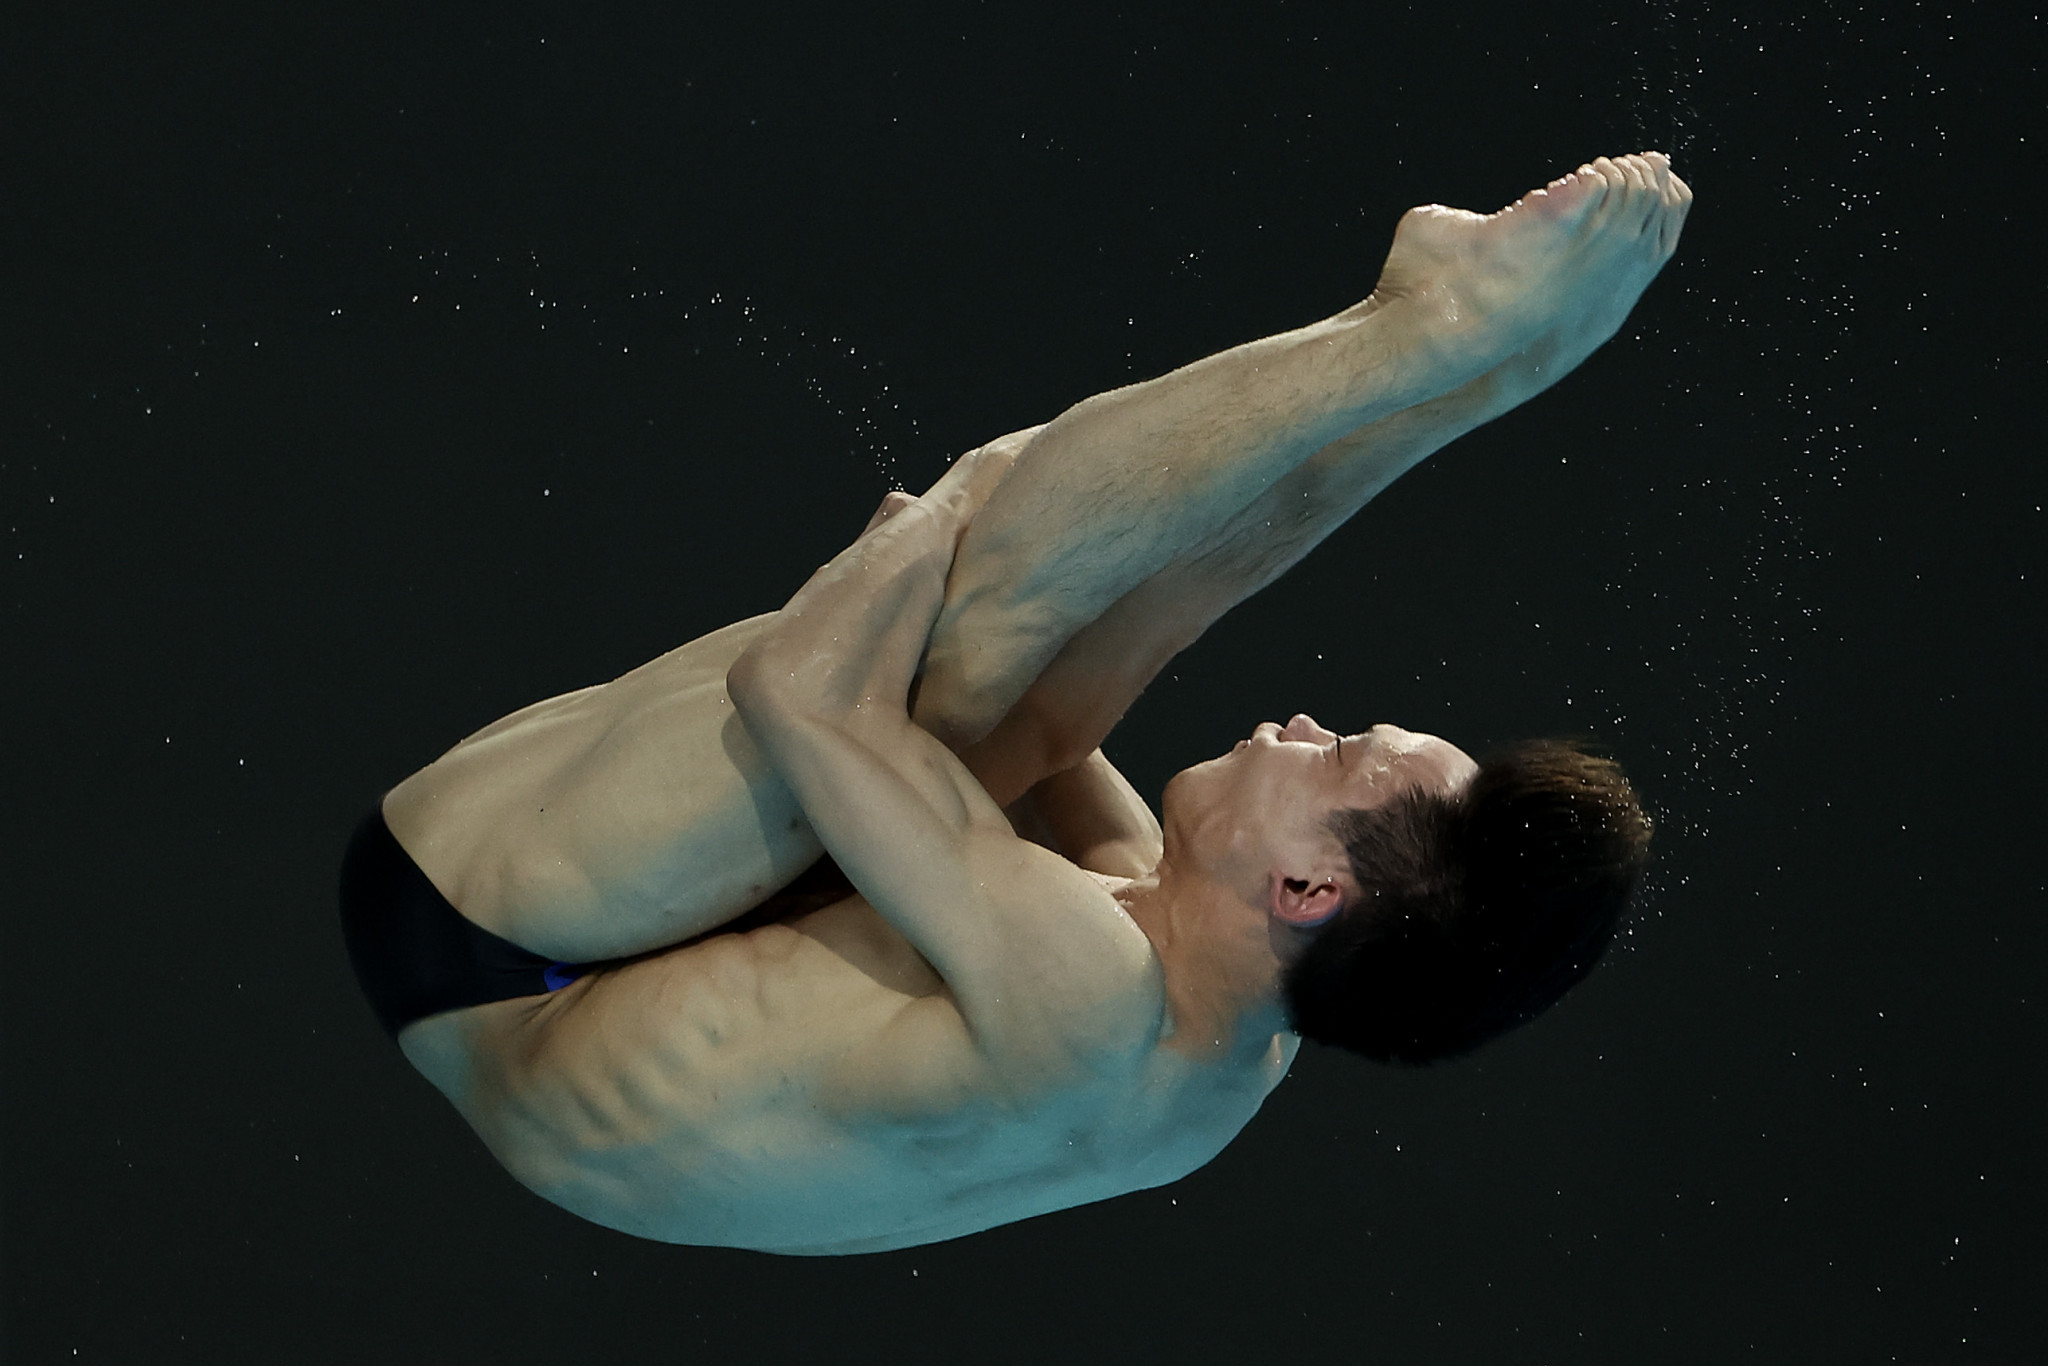 Yang Hao was among the Chinese winners at the Diving World Cup in Montreal as he took the men's 10 metres title ©Getty Images